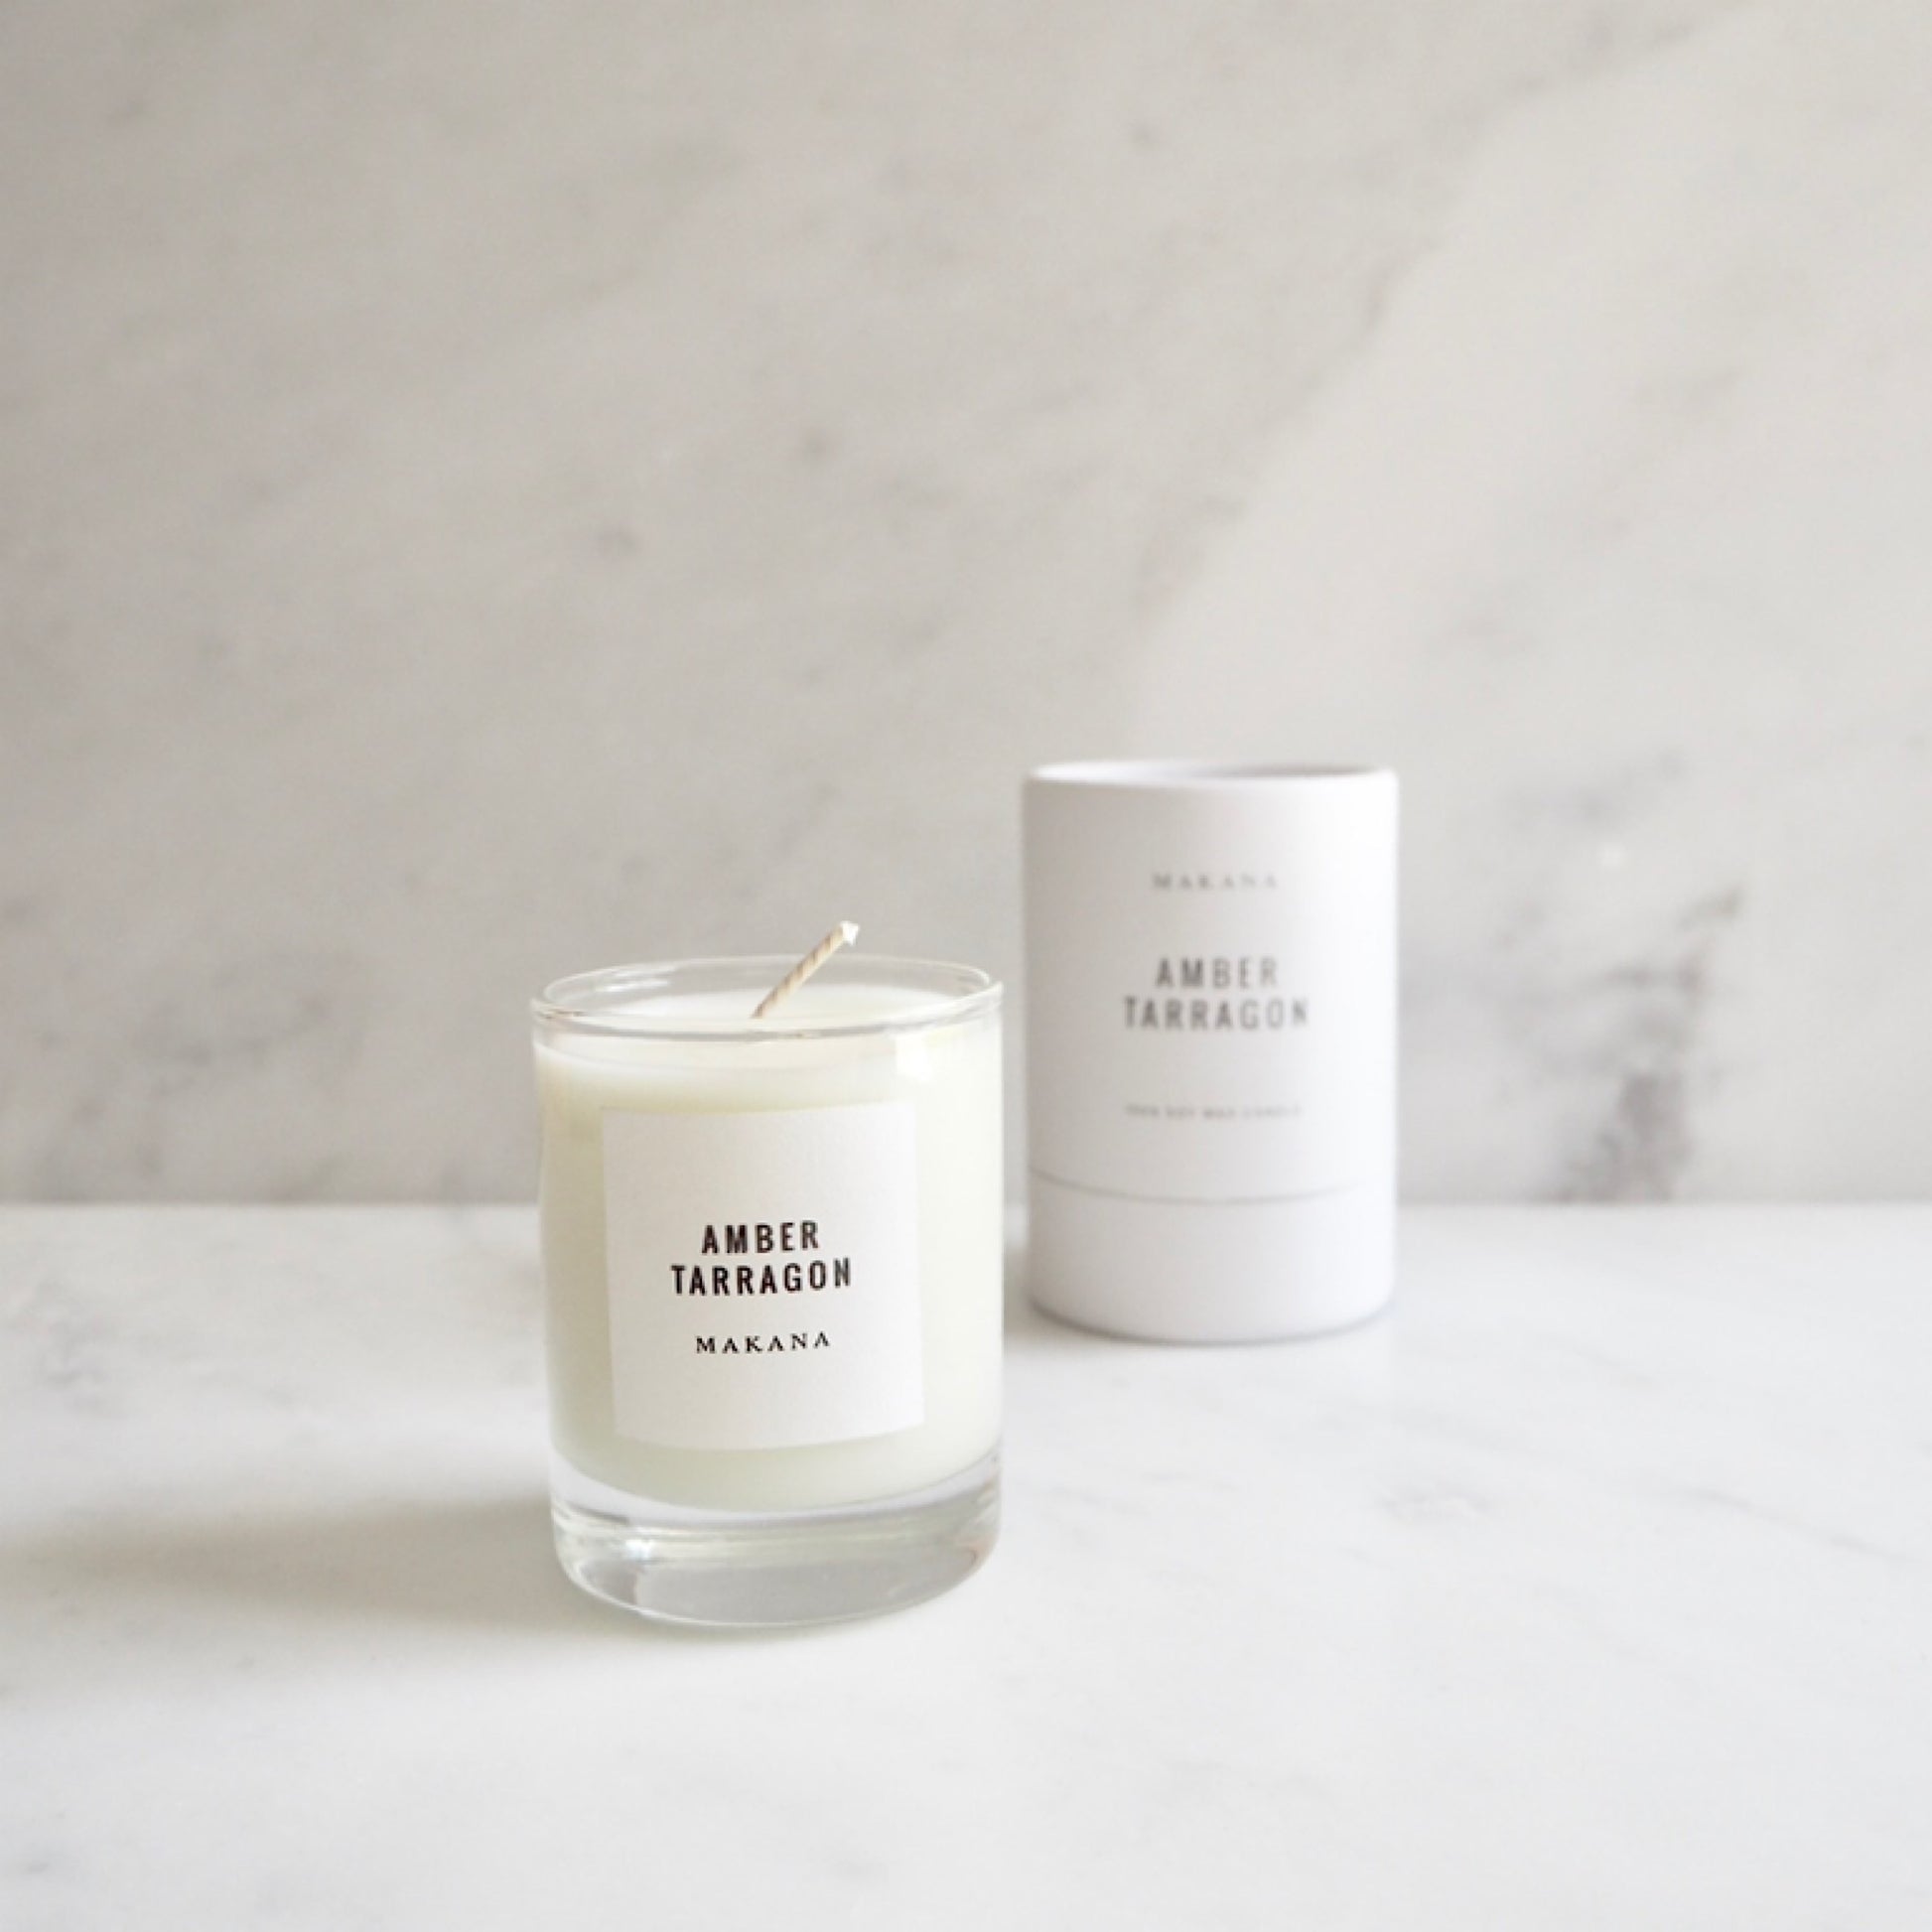 By Makana Candles. Amber Tarragon Candle: Resinous amber accented by vanilla and fennel, unveiling a heart of fresh tarragon, tuberose and basil, and finished with an accord of sensuous woods. Hand-poured in-house in small batches using simple, clean ingredients.